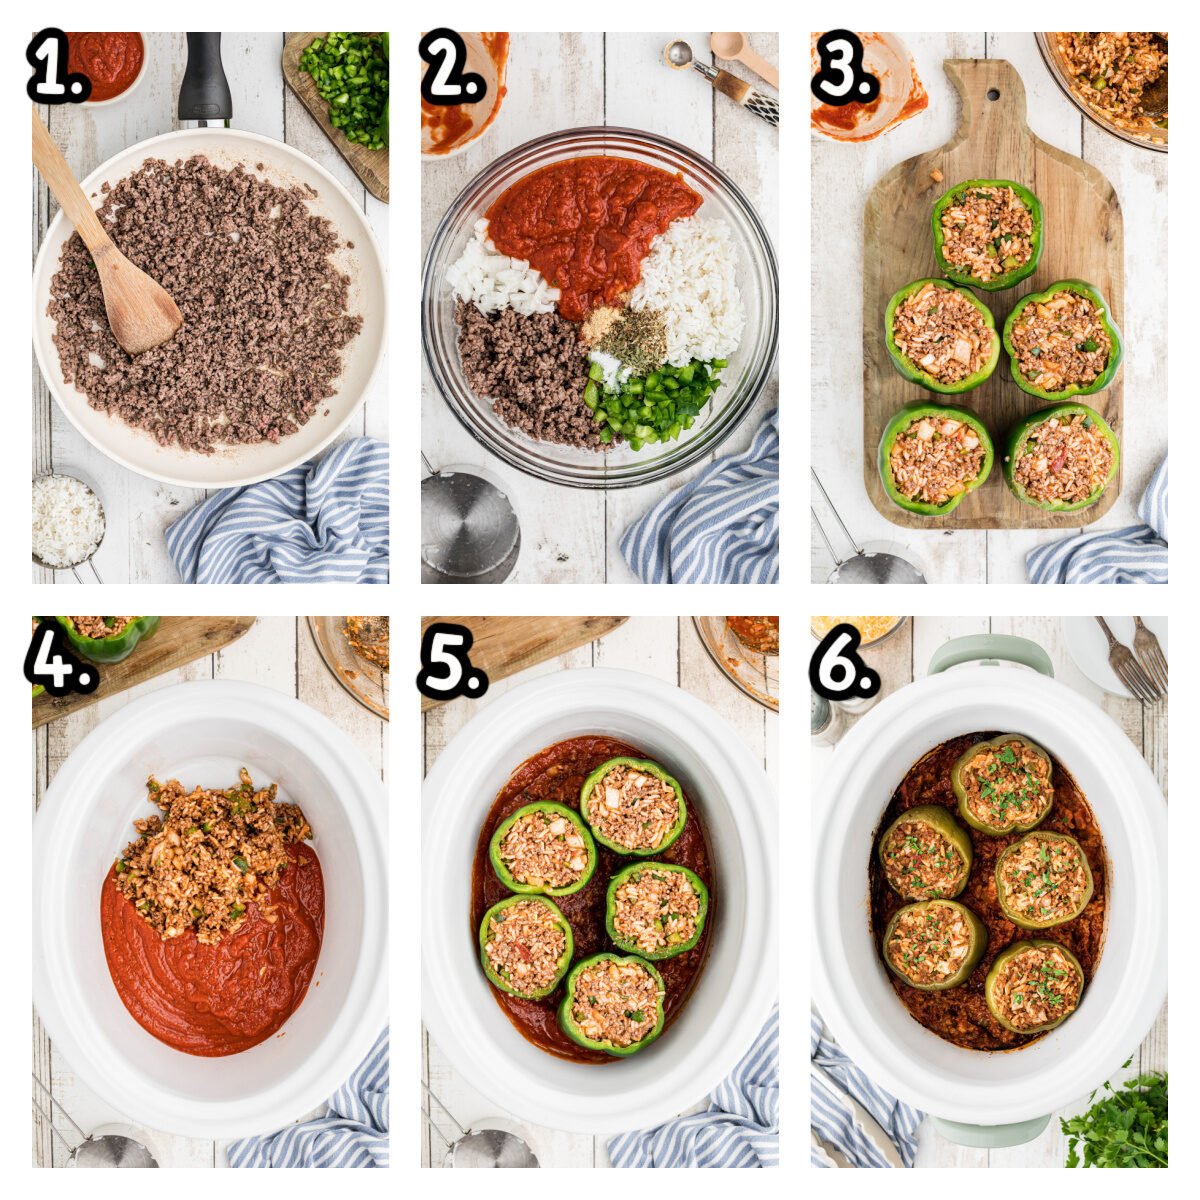 6 images showing how to make beef stuffed peppers in the slow cooker.